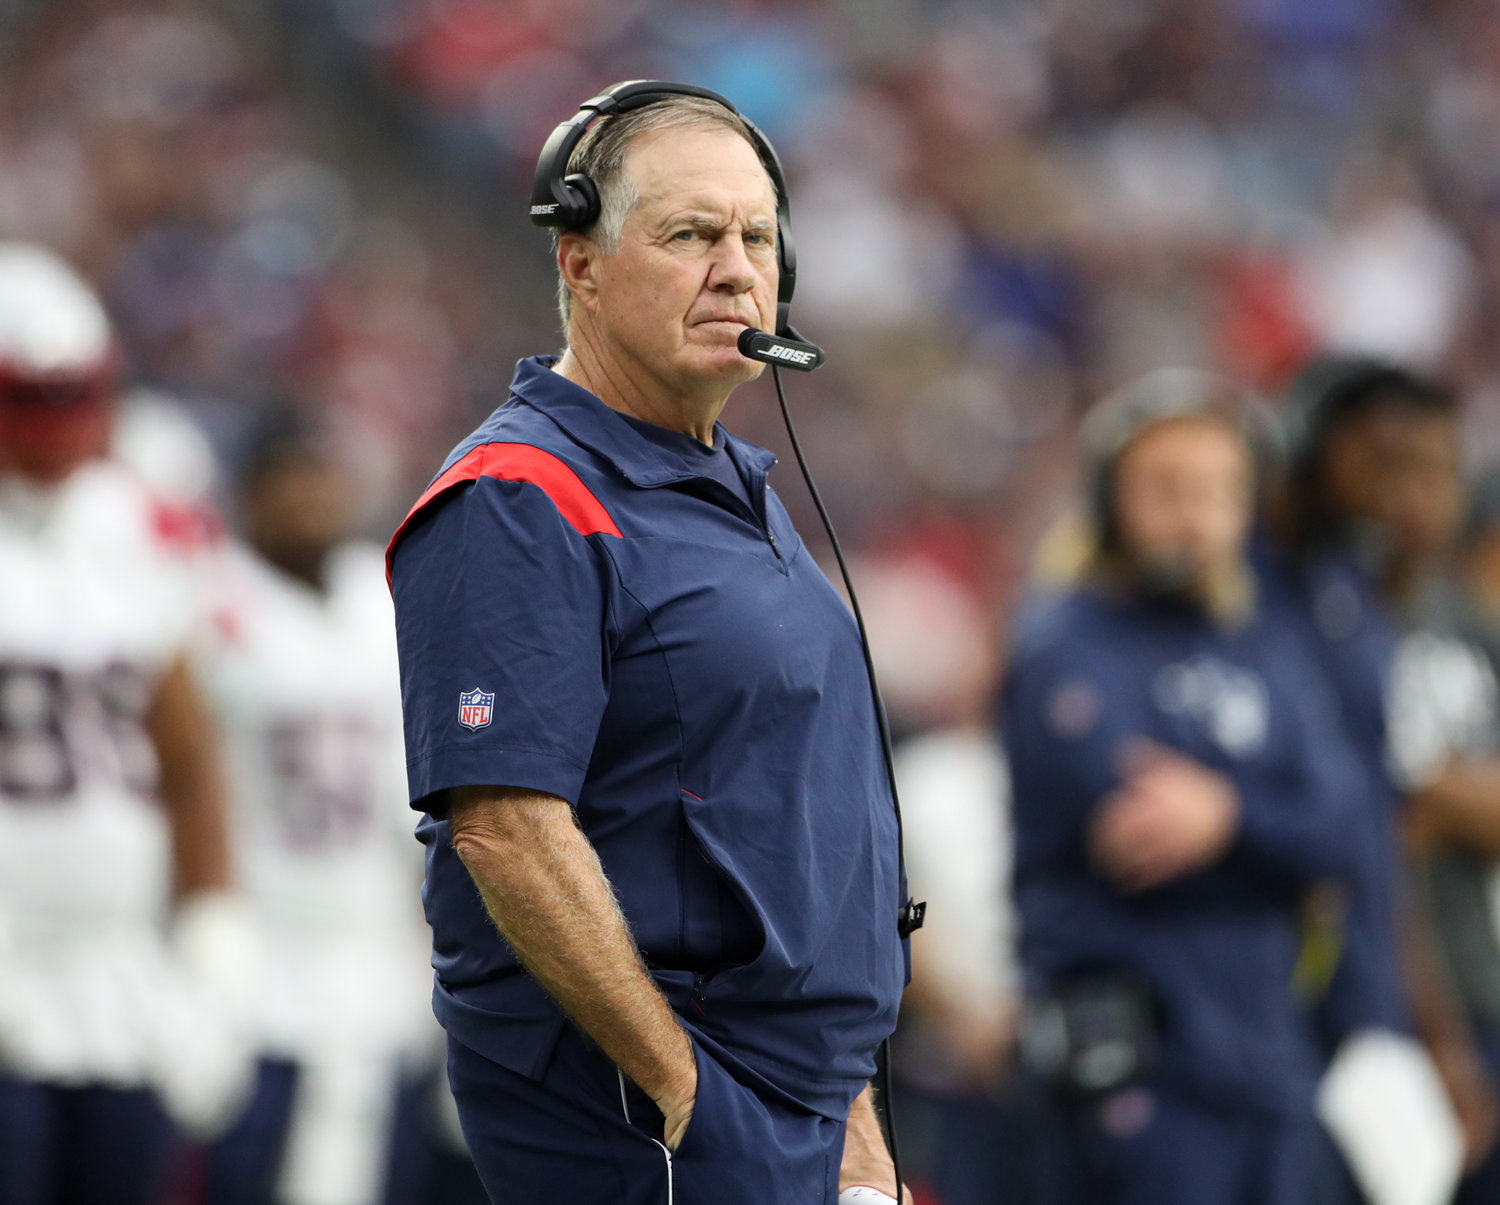 New England Patriots head coach Bill Belichick during an NFL game between Houston and New England on October 10, 2021 in Houston, Texas. The Patriots won 25-22.